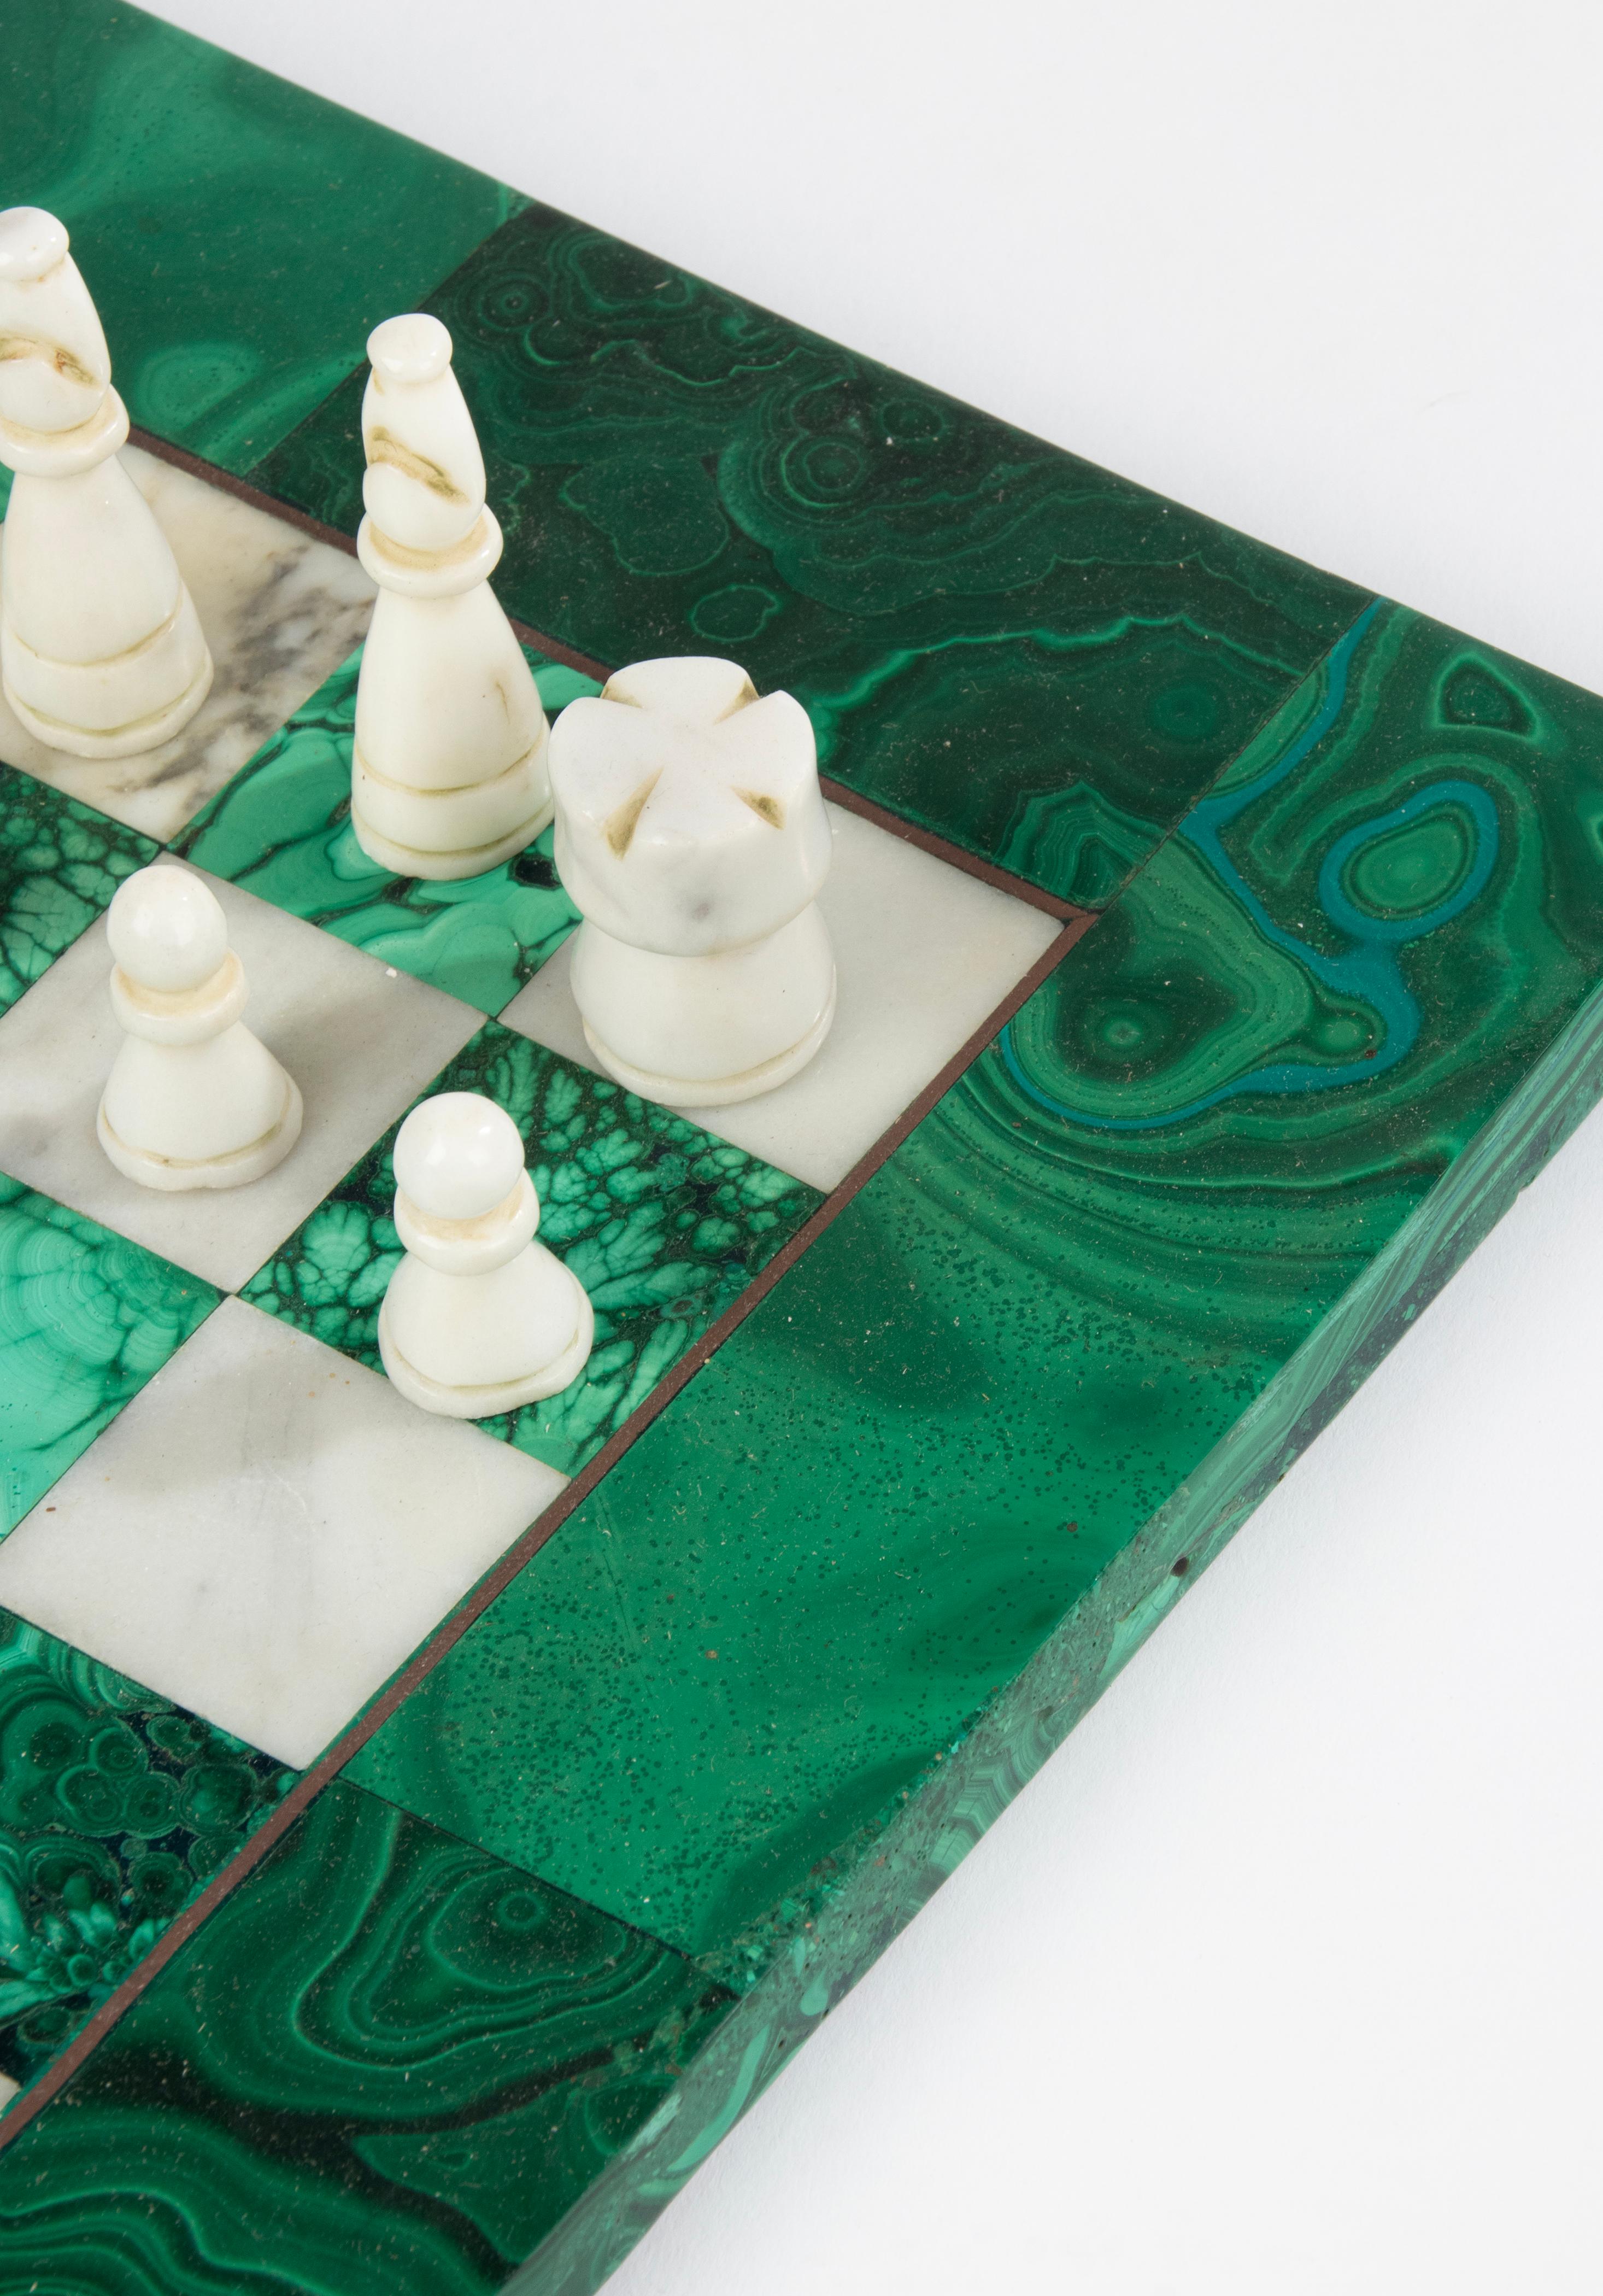 Mid 20th Century Malachite and Marble Chessboard Wit Pieces 5